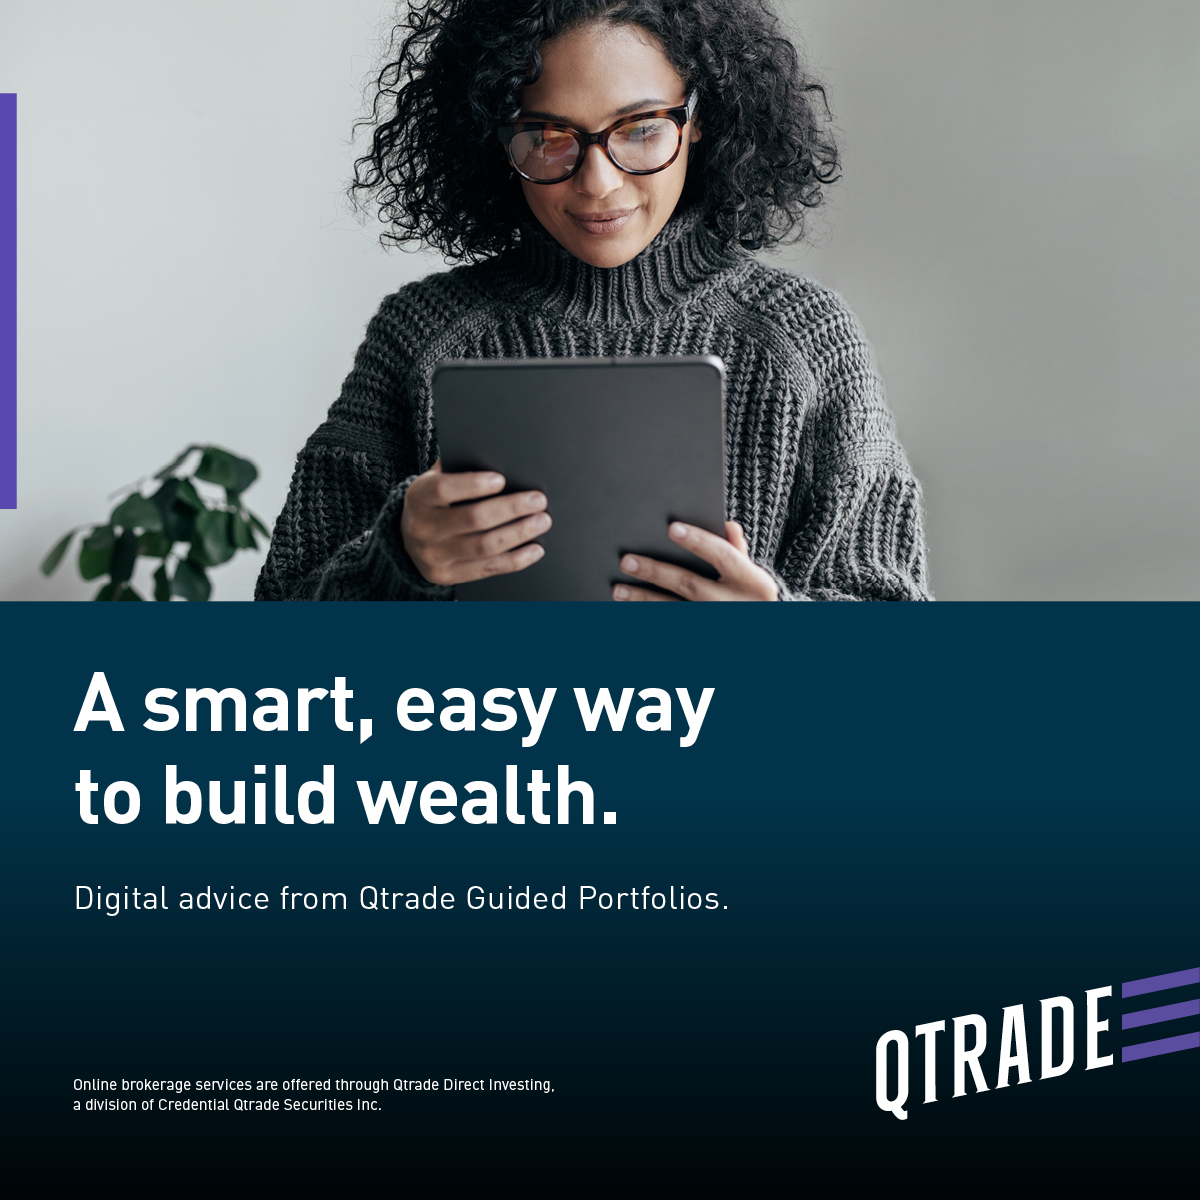 A smart, easy way to build wealth. Digital advice from Qtrade Guided Portfolios.